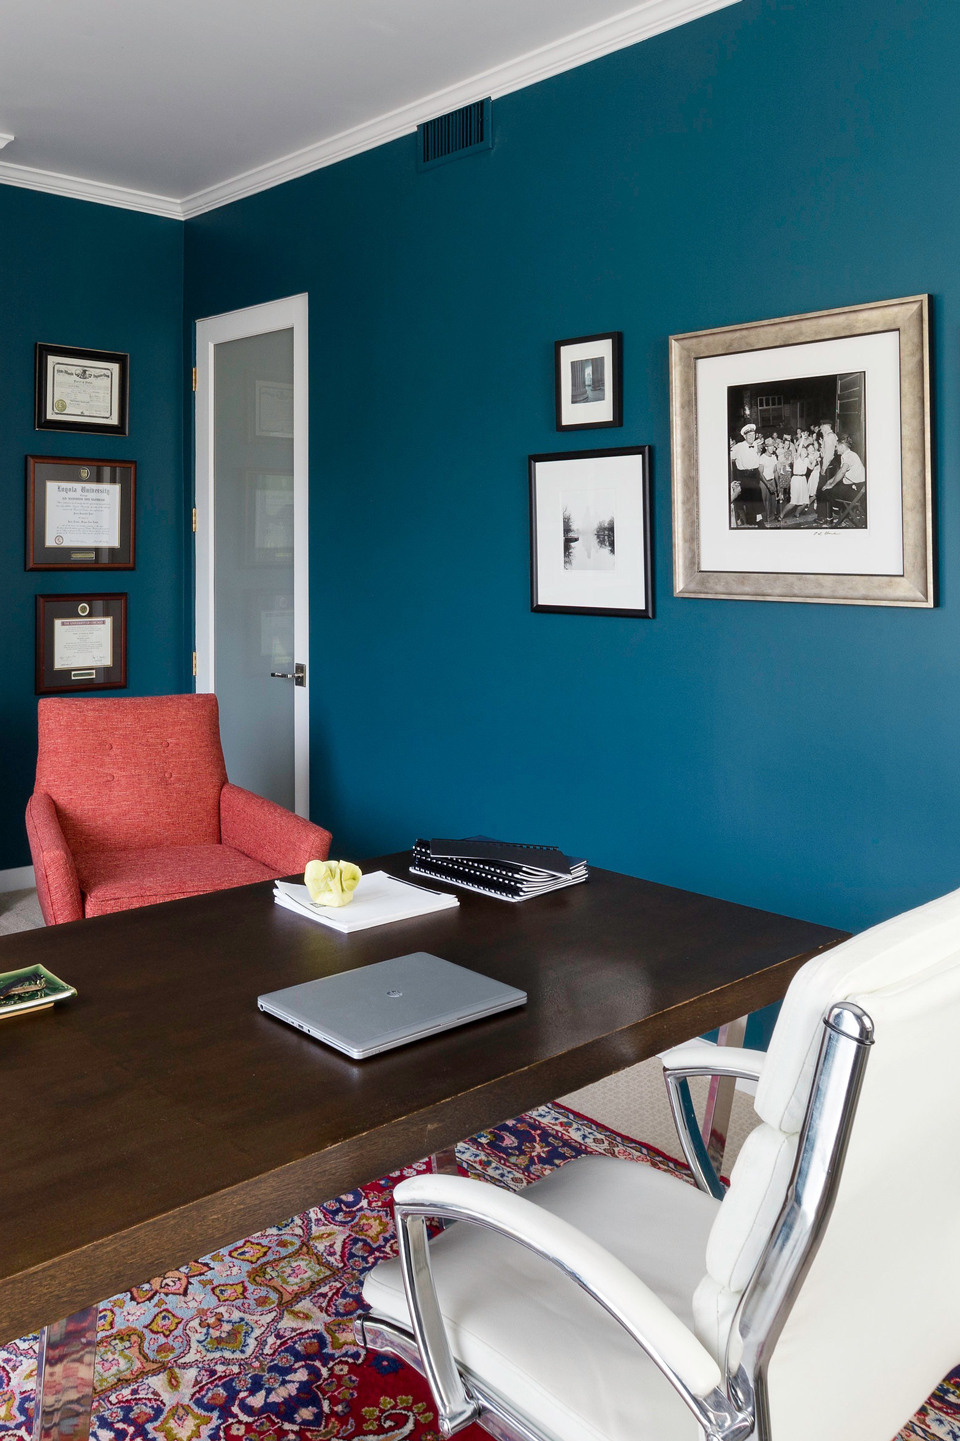 Teal-painted walls of a home office